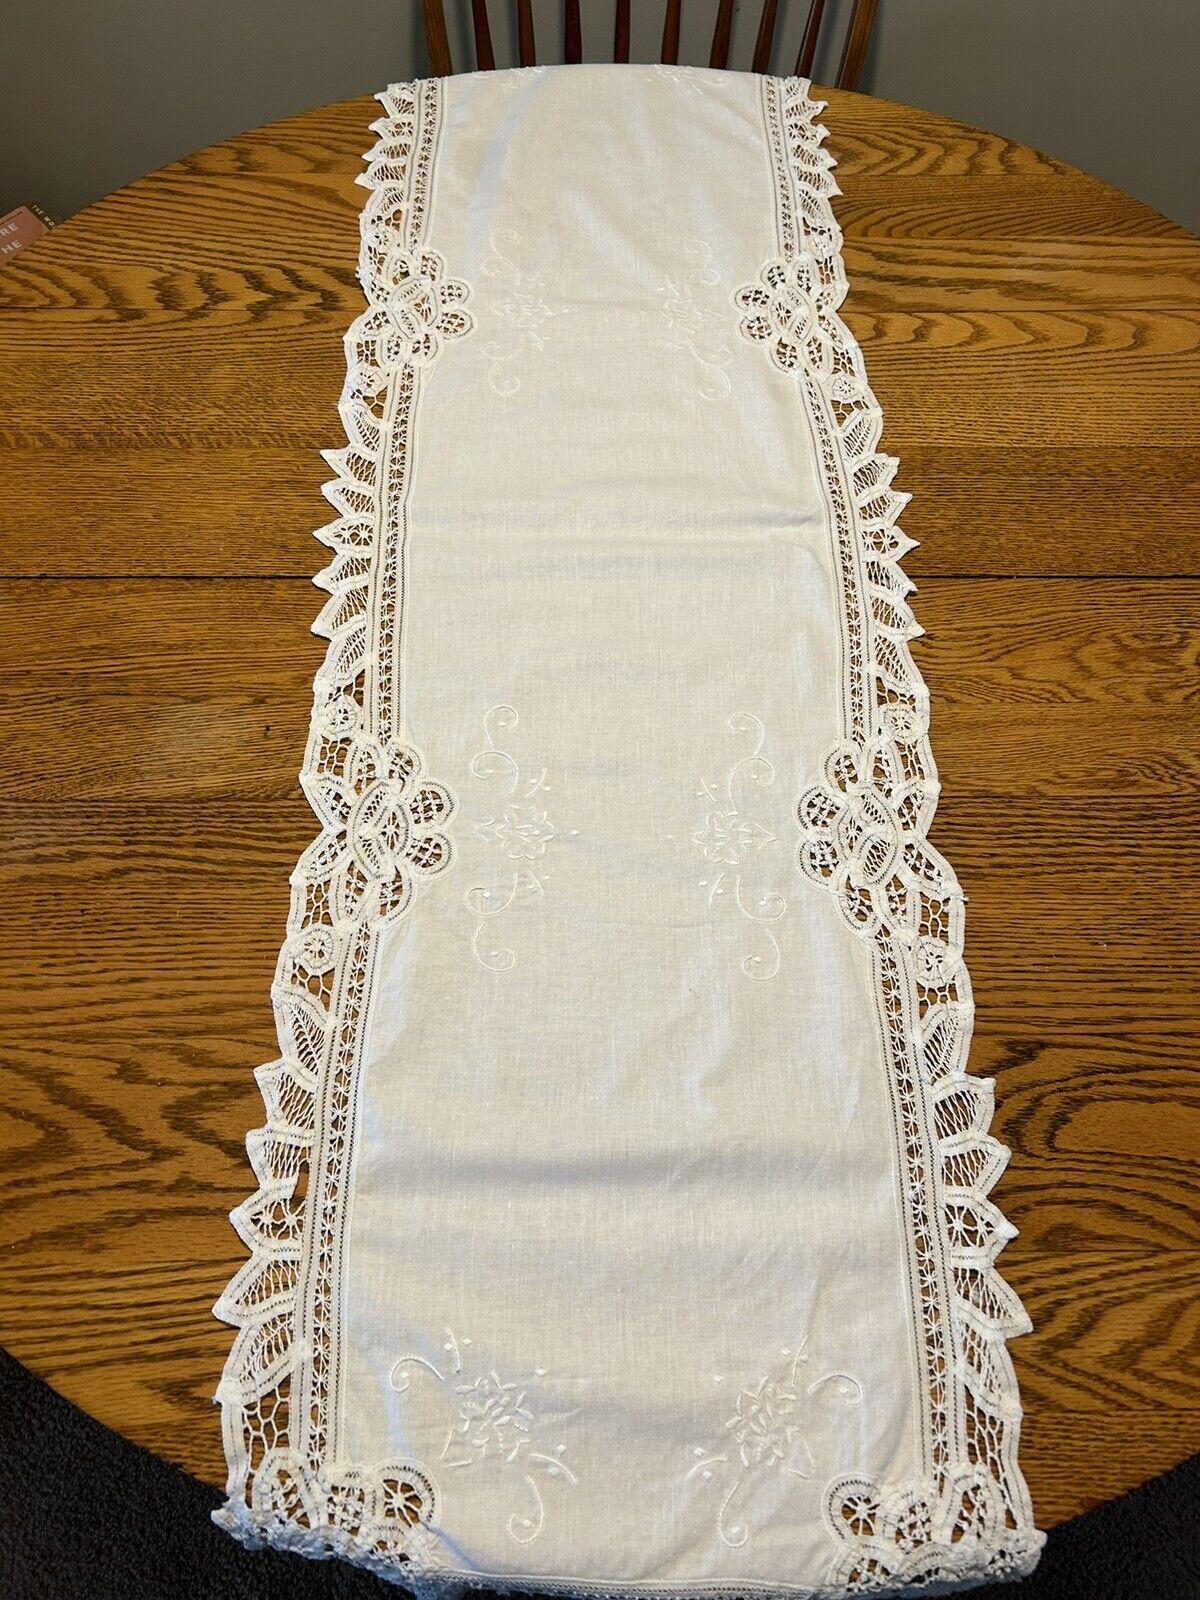 Vintage Battenberg Table Runner Lace Embroidered White Cotton 48” X 15”